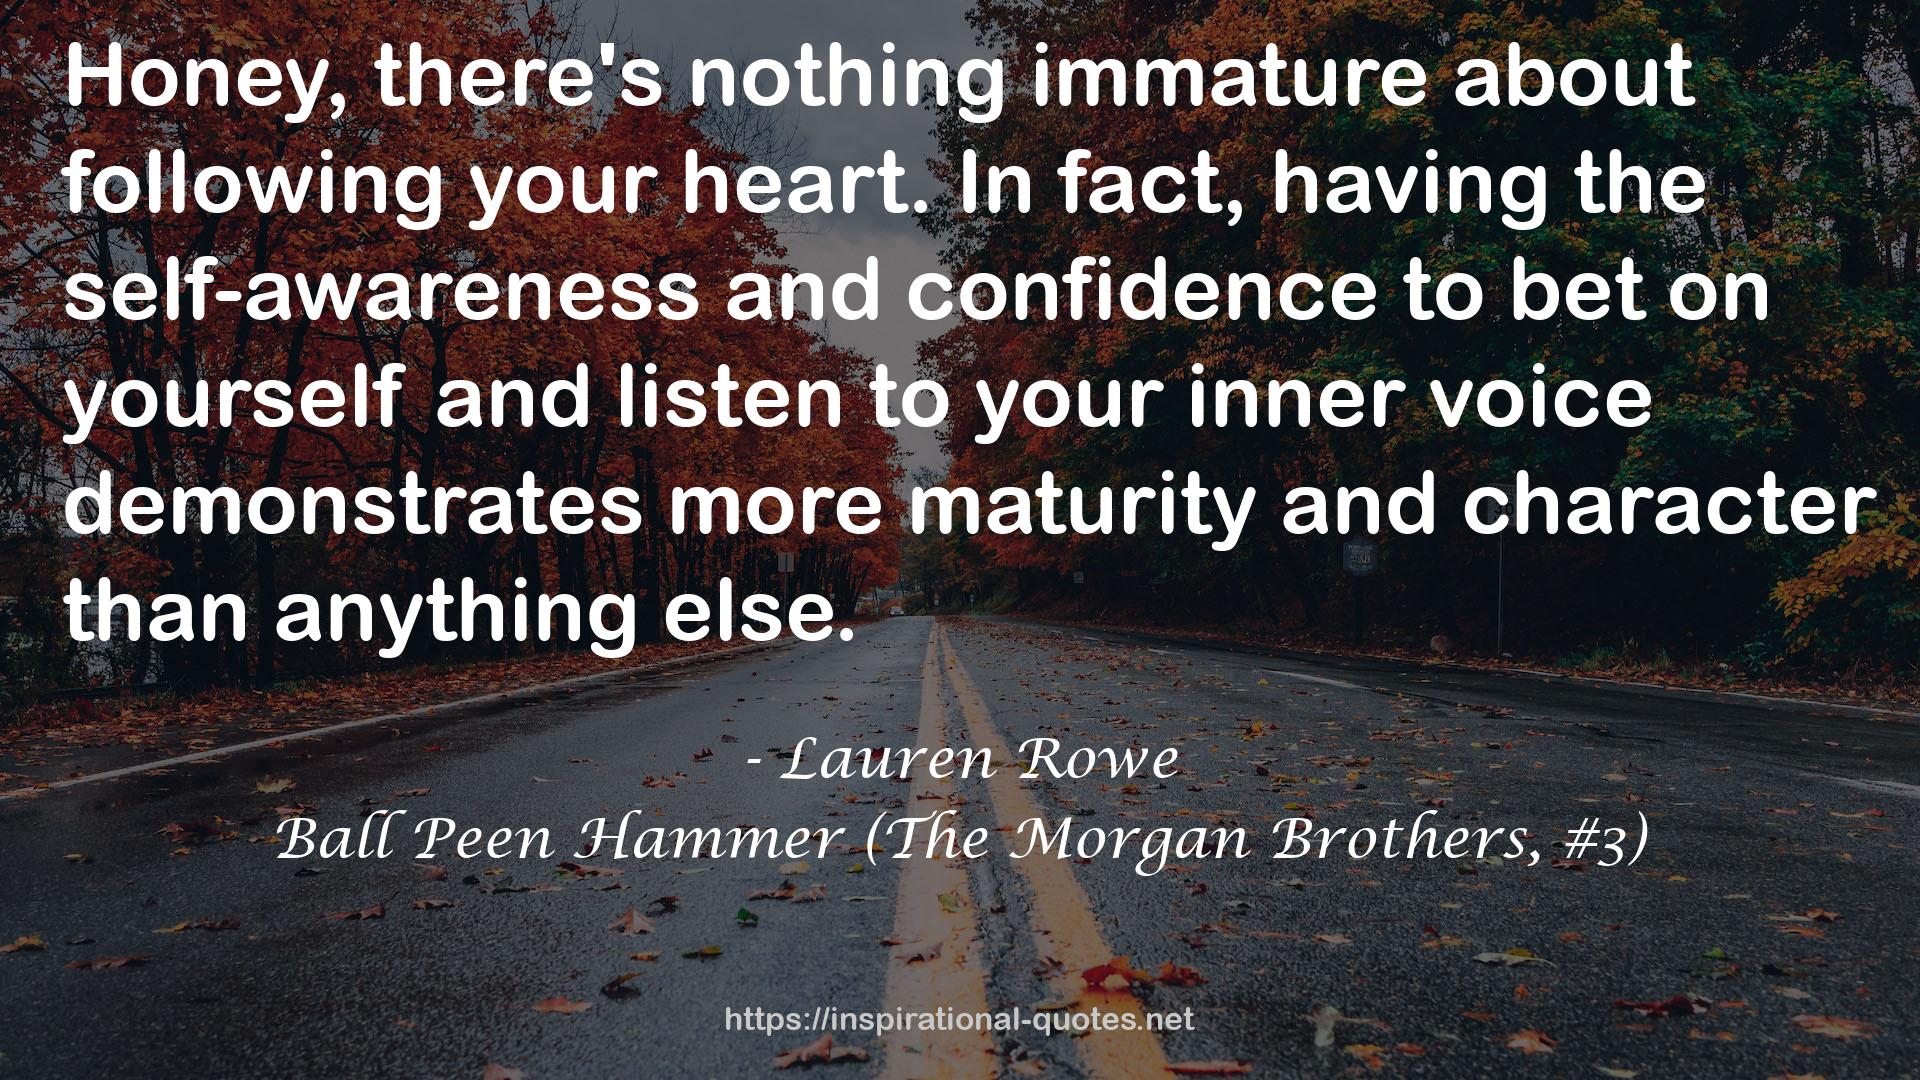 Ball Peen Hammer (The Morgan Brothers, #3) QUOTES